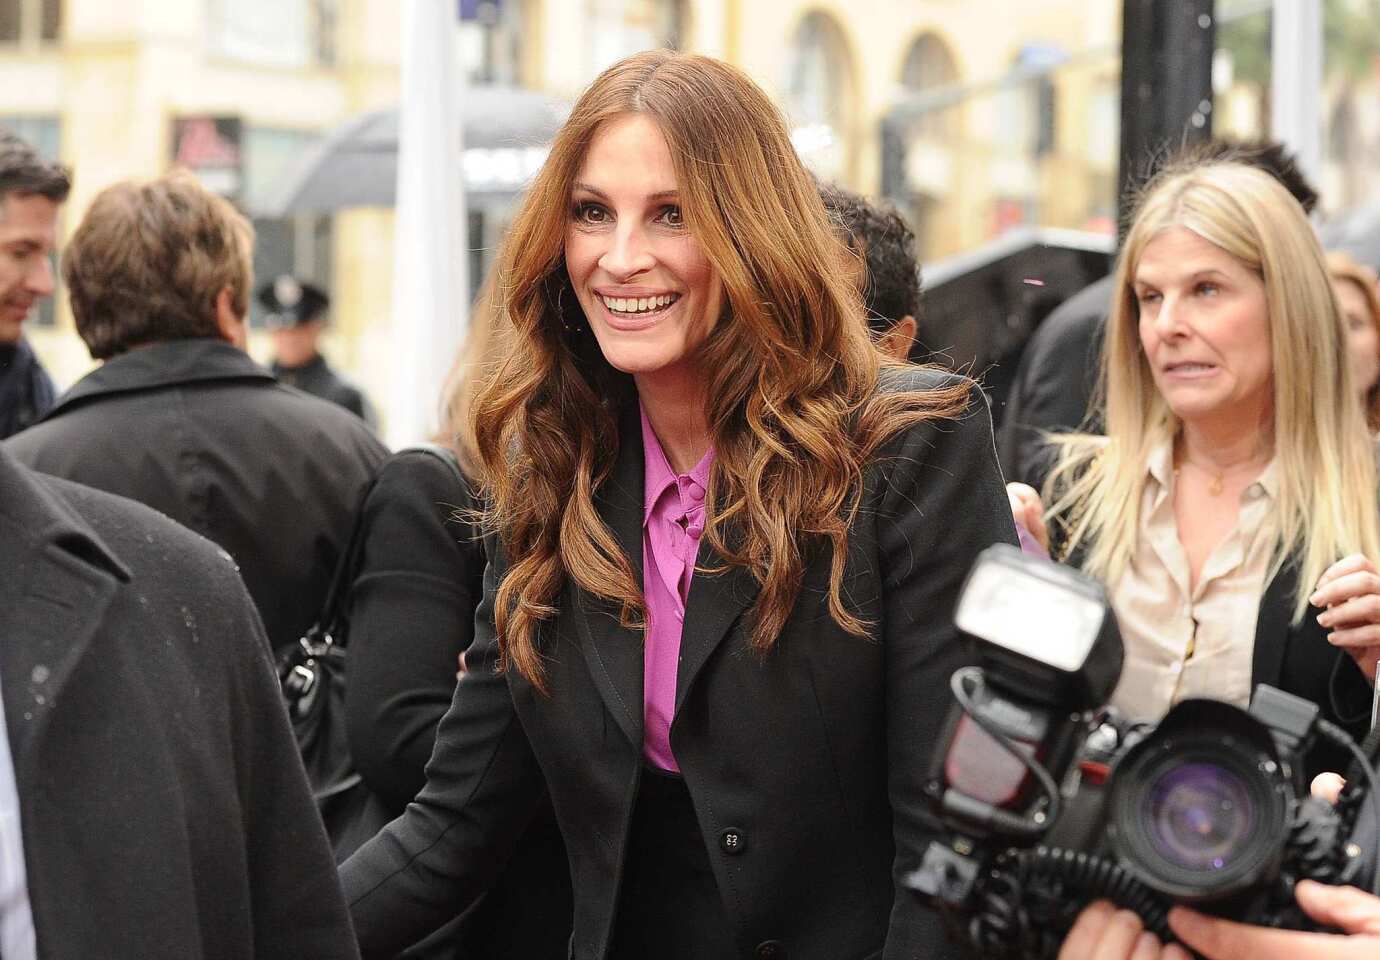 Julia Roberts is the evil queen who rules Snow White's kingdom and hopes to steal the prince.